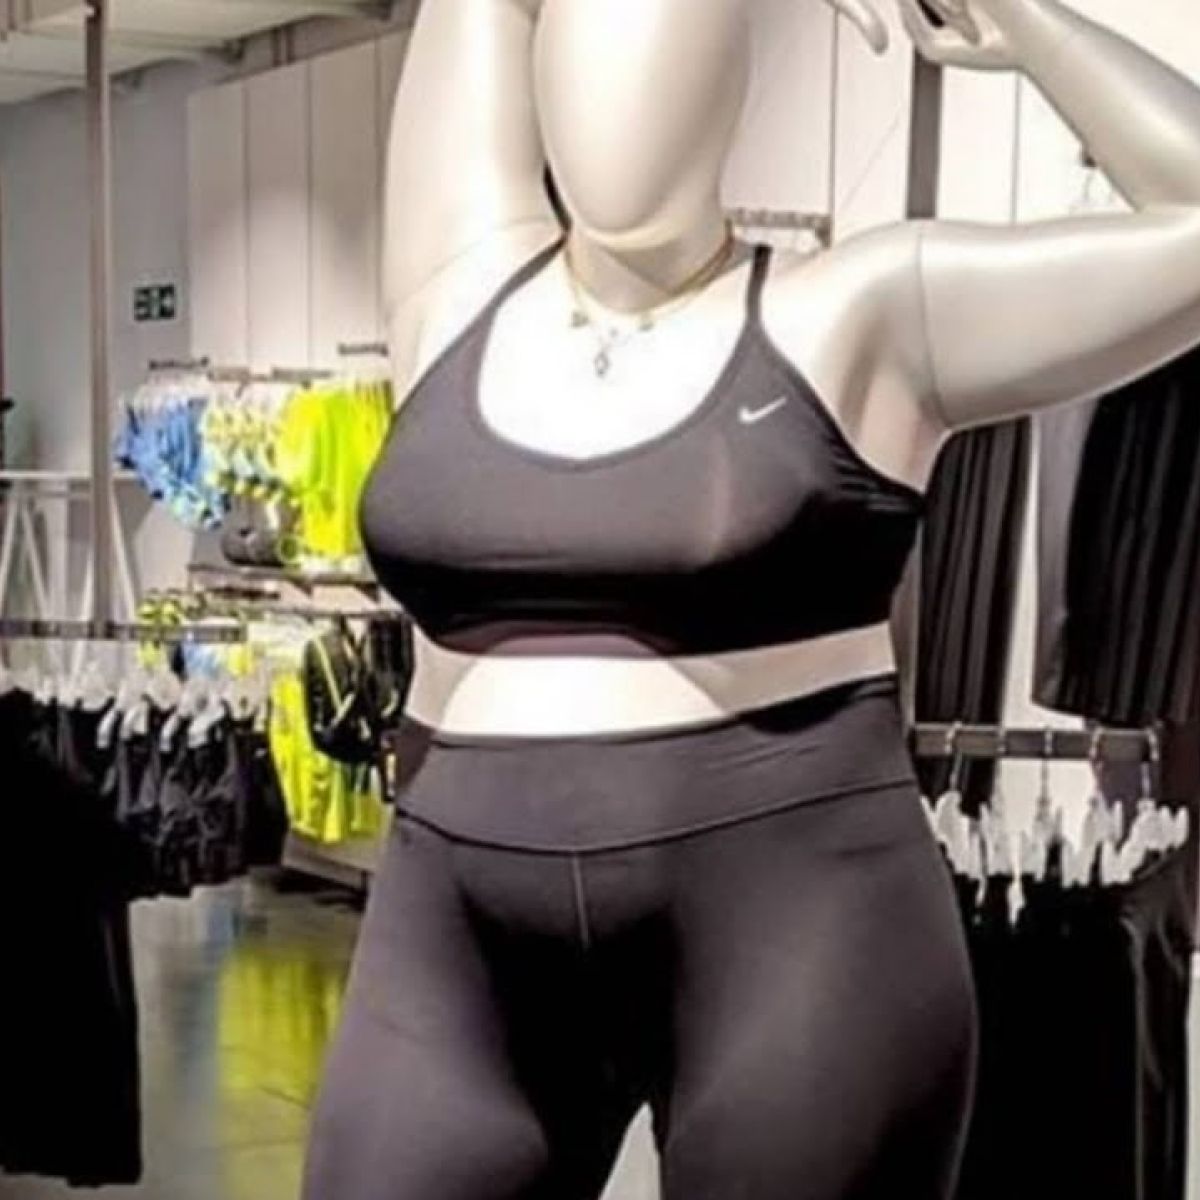 Even Nike's size-16 mannequin isn't safe from fat-shamers